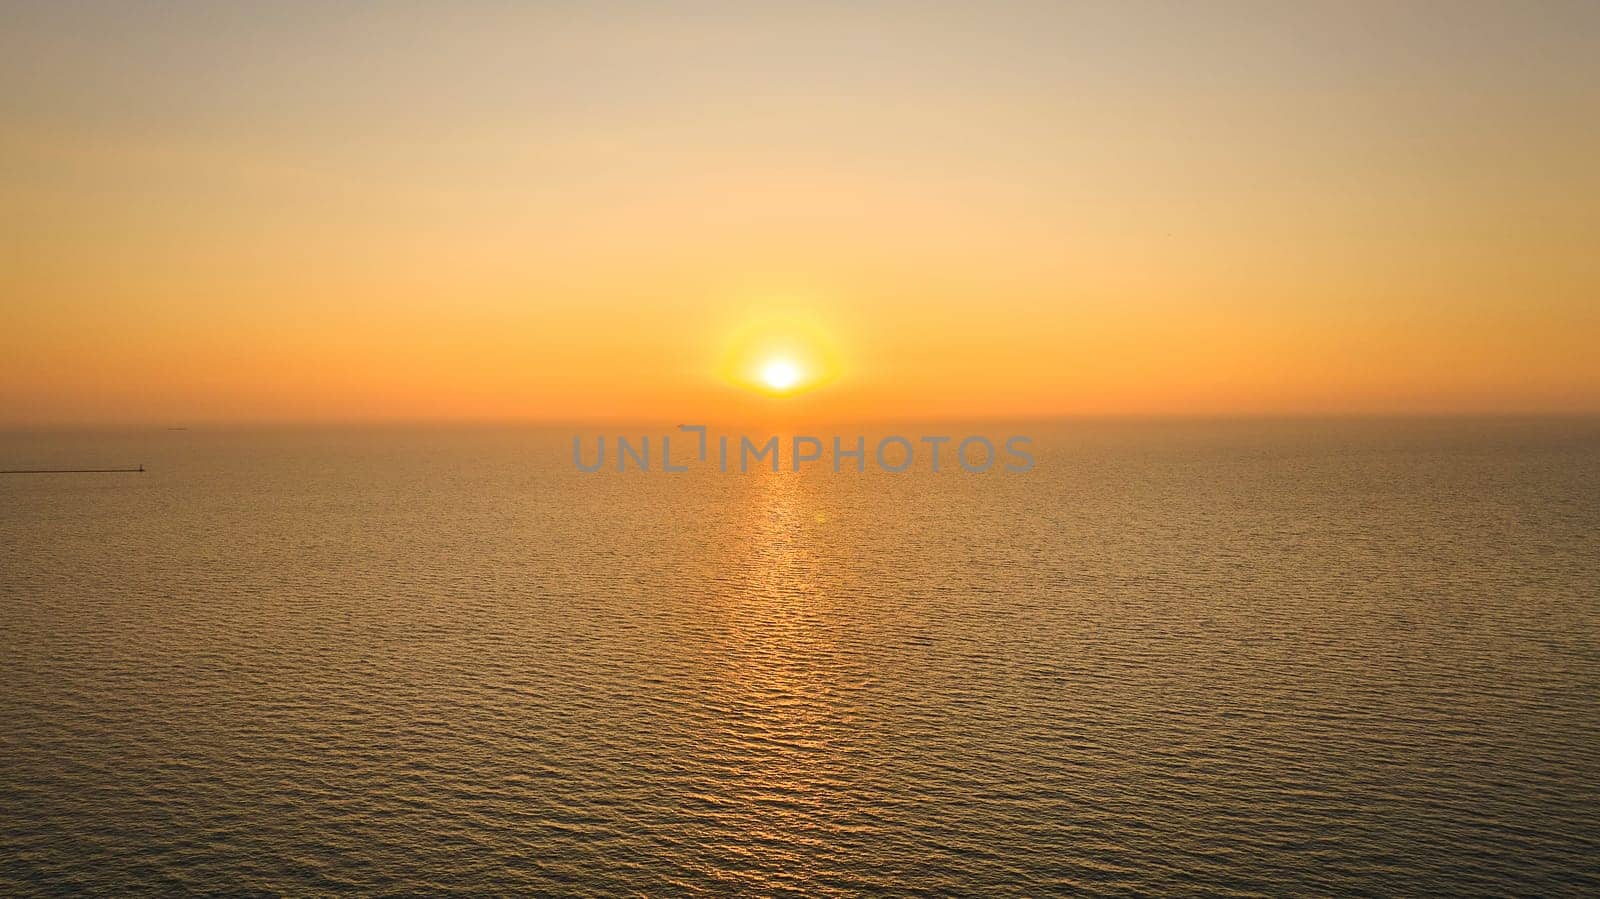 Image of Aerial over water with inspiring sun rising over great Lake Michigan, sunrise at dawn, Chicago, IL